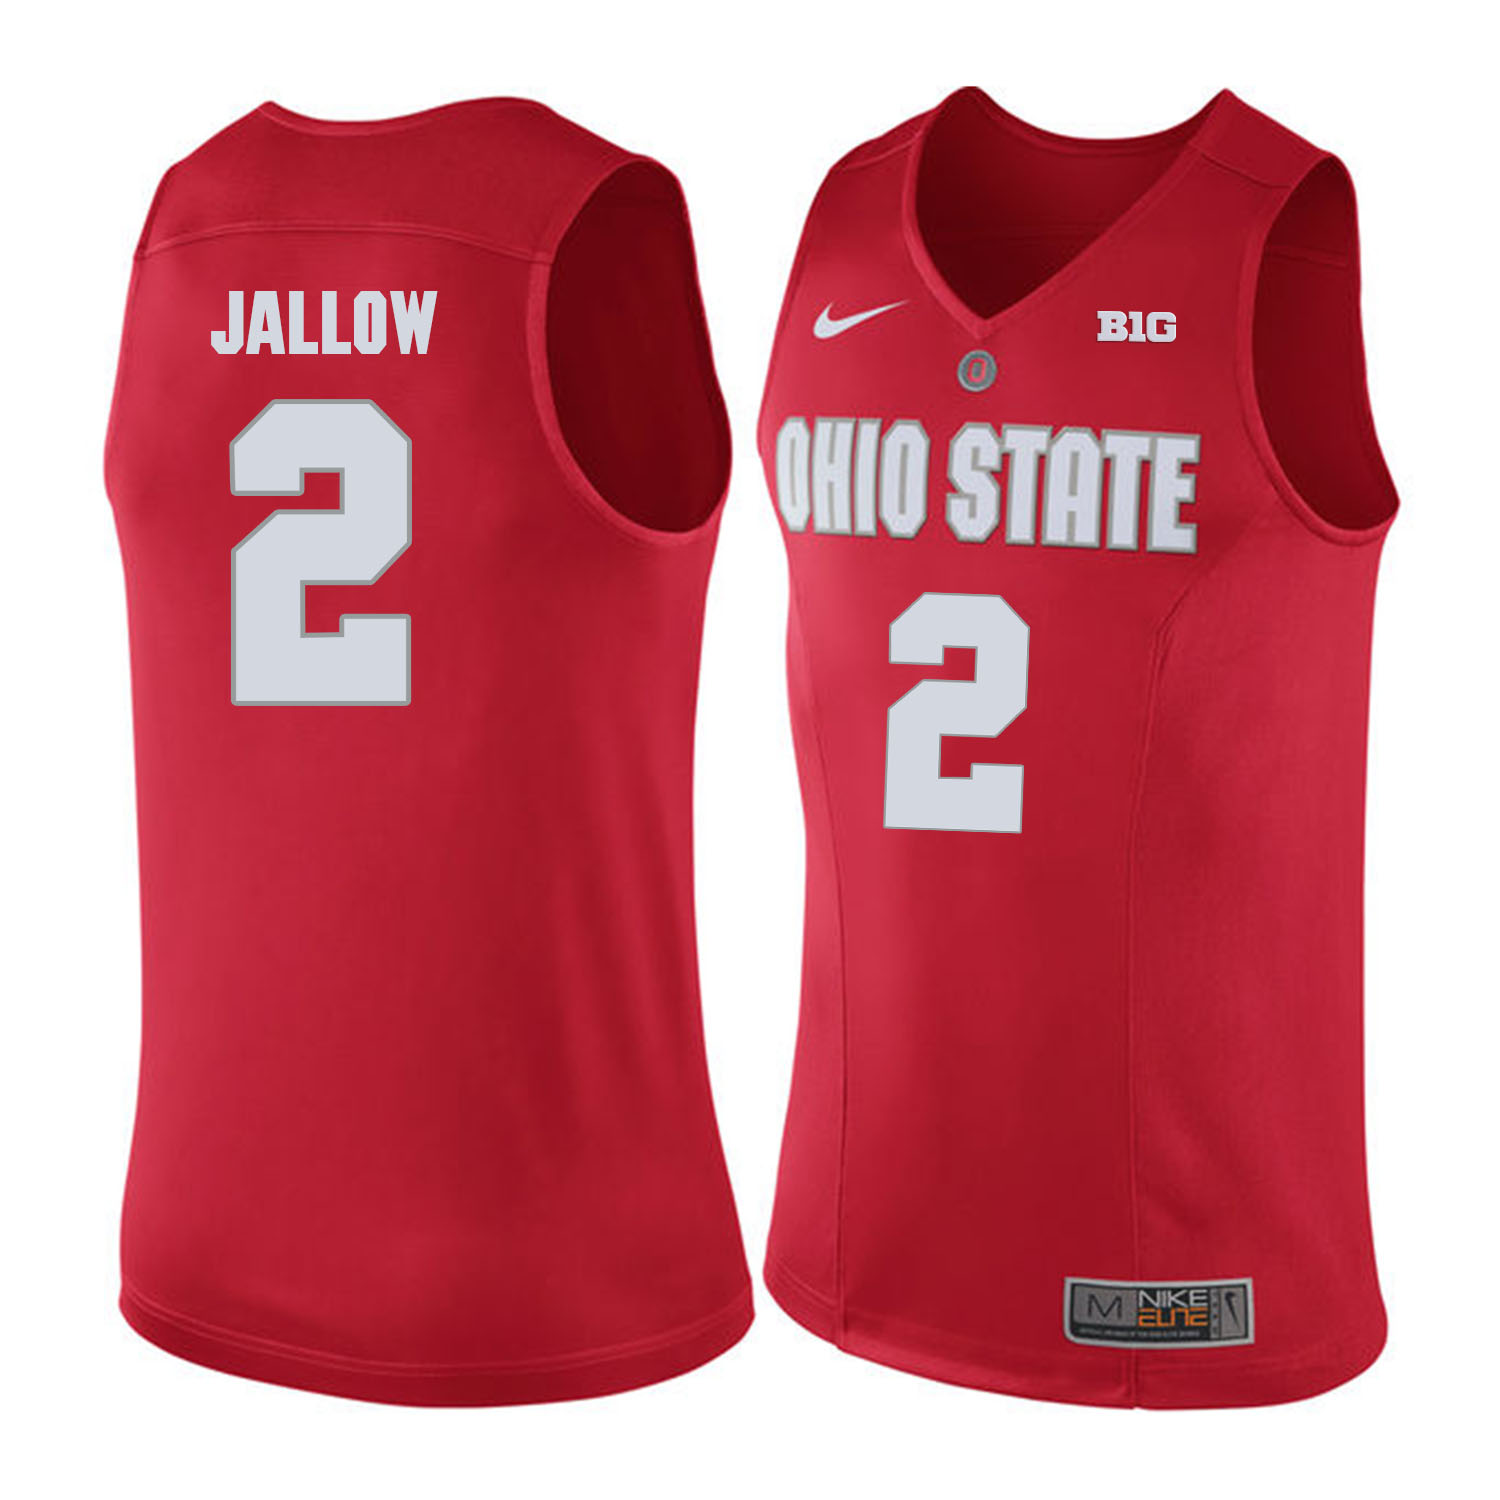 Ohio State Buckeyes 2 Mussa Jallow Red College Basketball Jersey